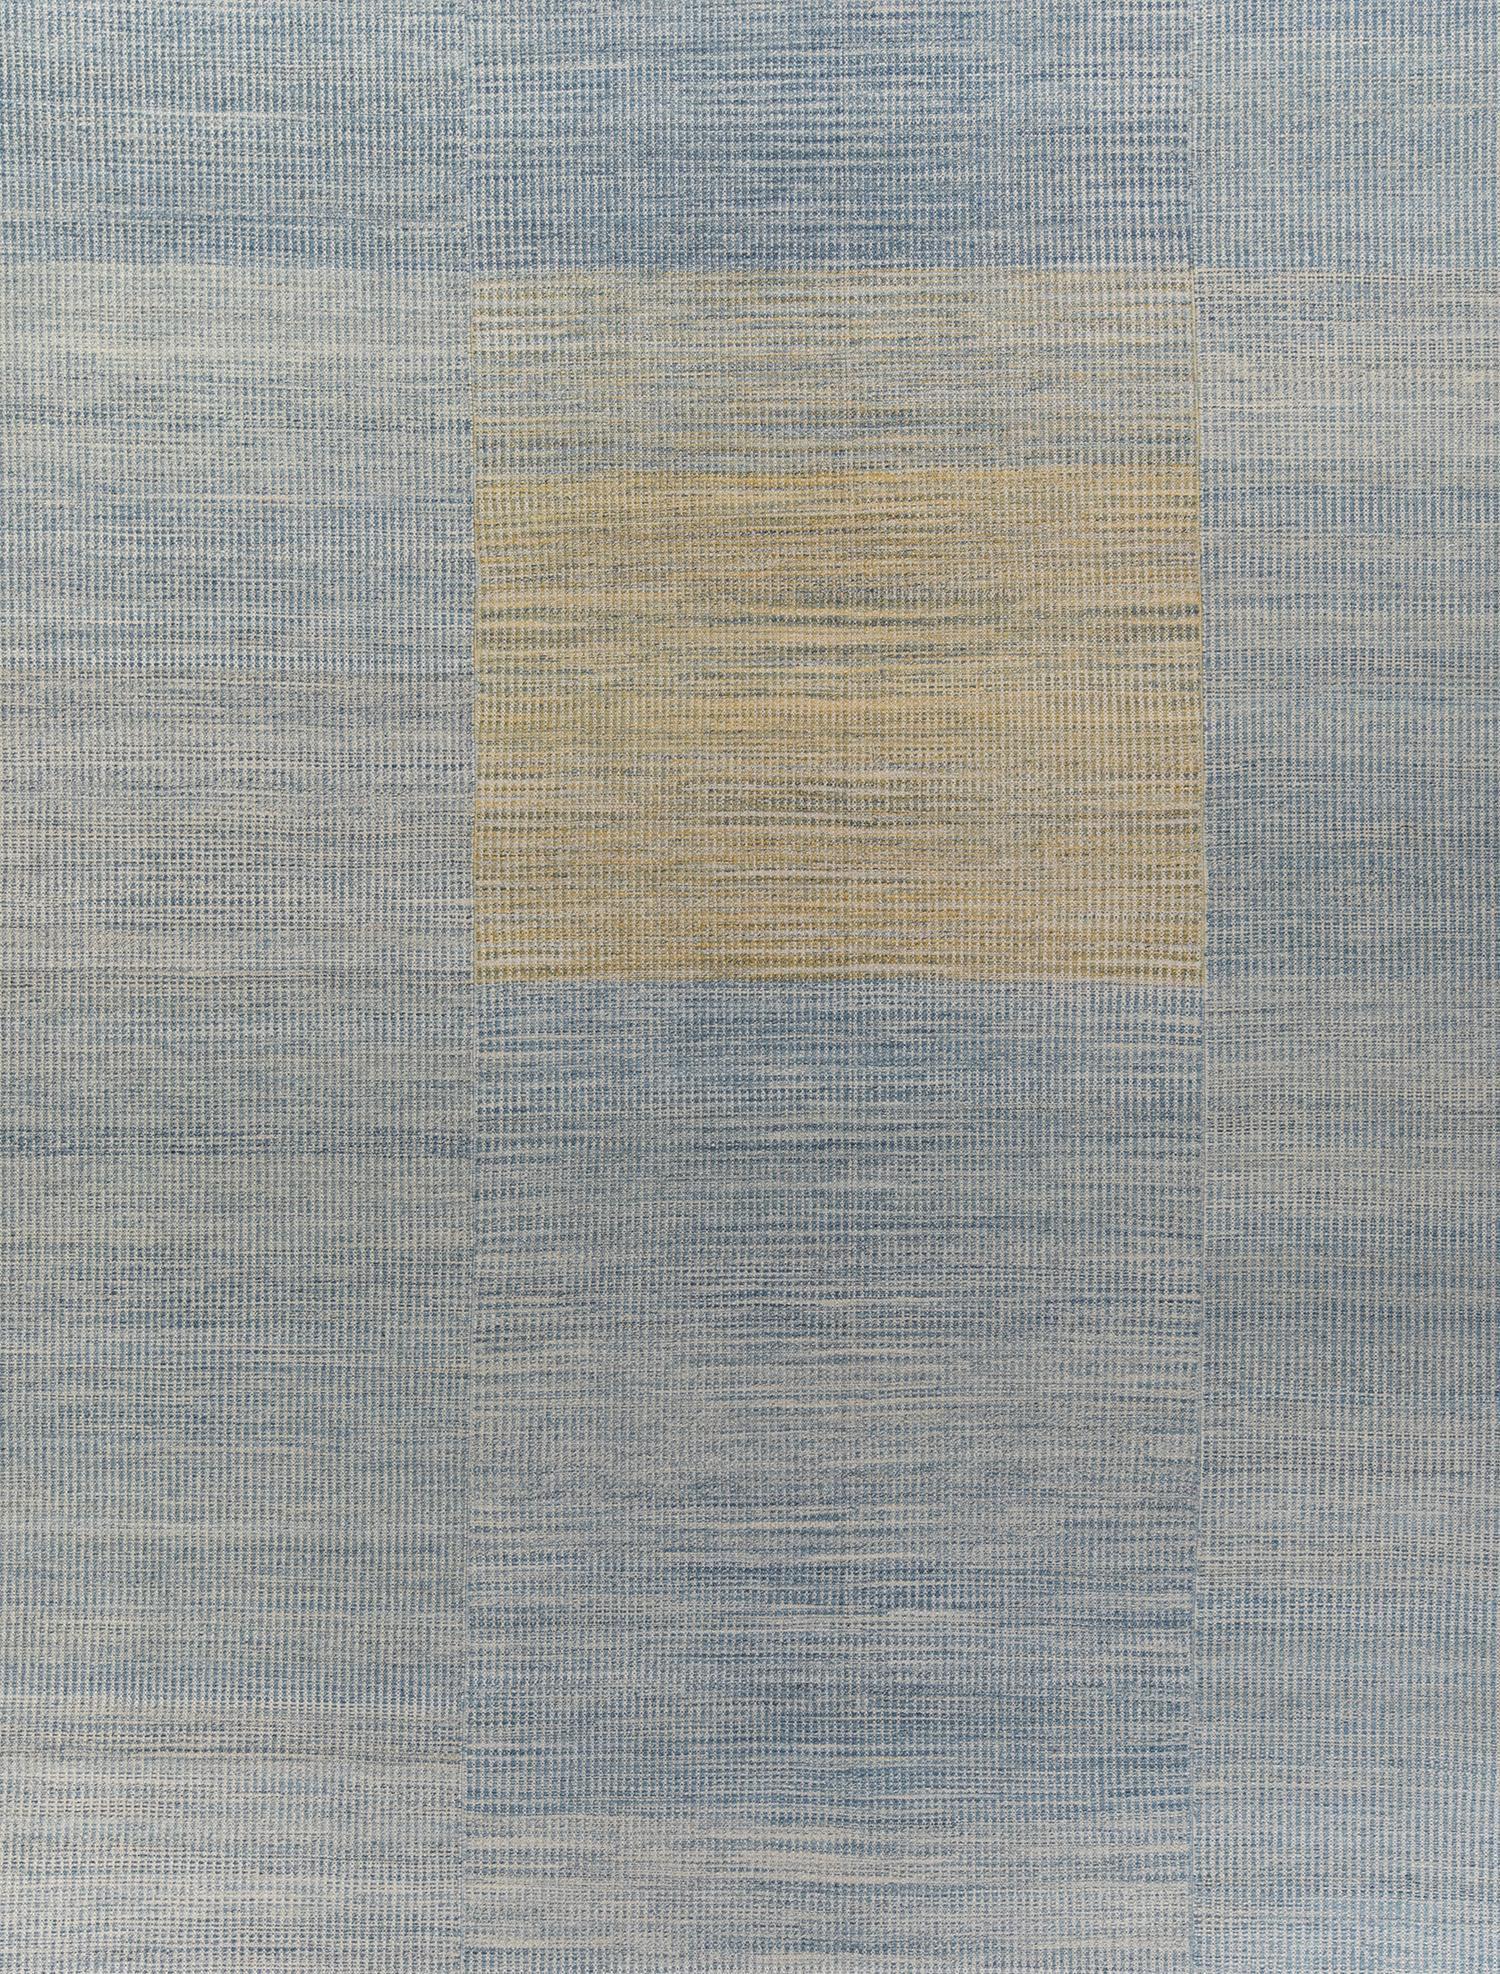 Hand-Woven Mid-Century Style Modern Minimalist Flatweave Wool Rug in Blue and Yellow For Sale